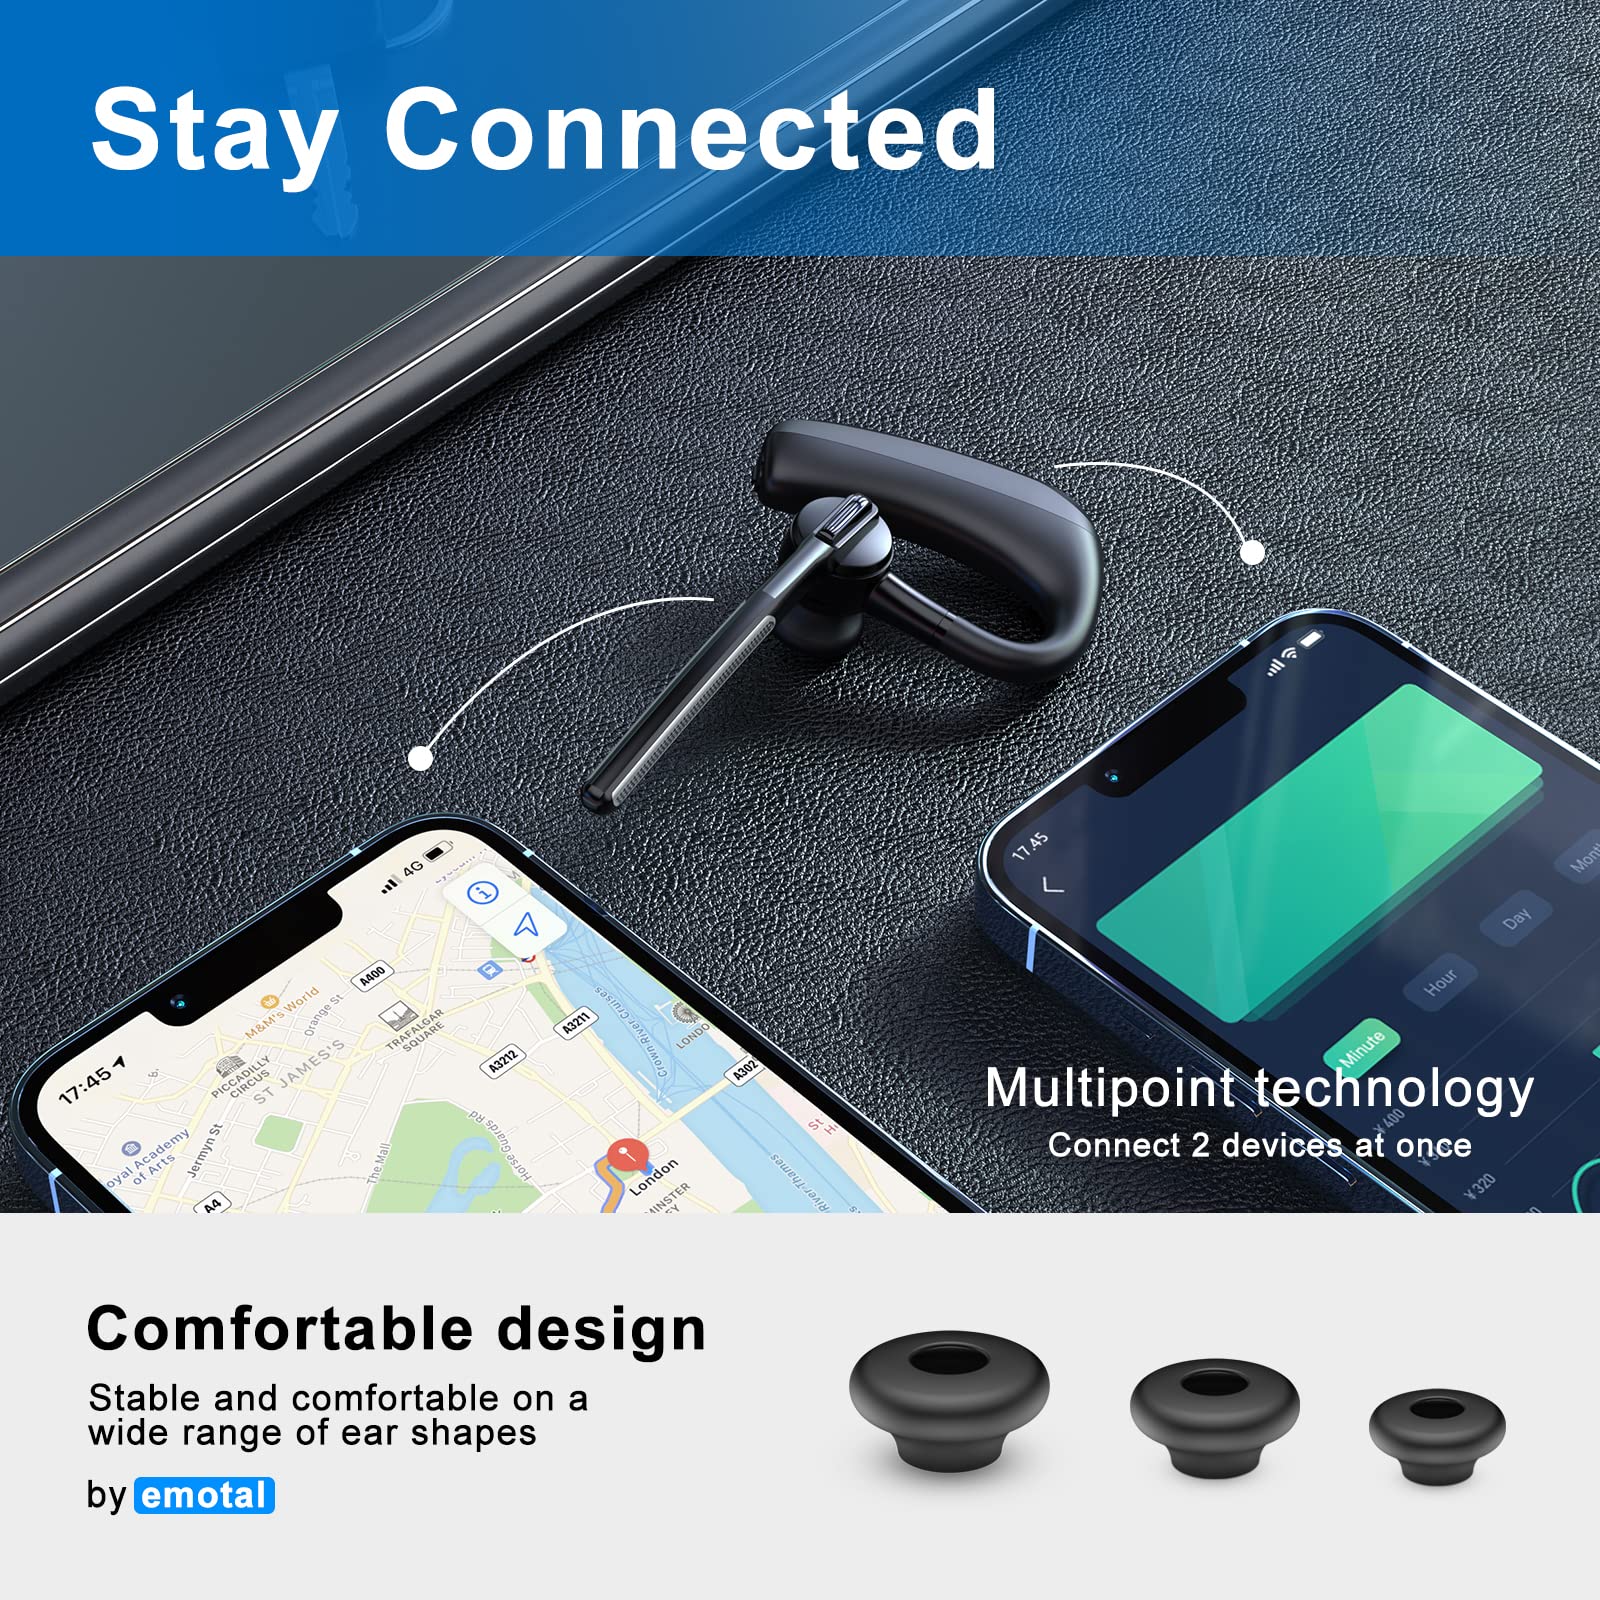 emotal Bluetooth Headset Dual-Mic ENC +CVC 8.0 Noise Cancelling Aptx HD HiFi Stereo15Hours HD Talktime 200Hours Standby Bluetooth Earpiece Compatible for iOS/Android Cellphone with Storage Case